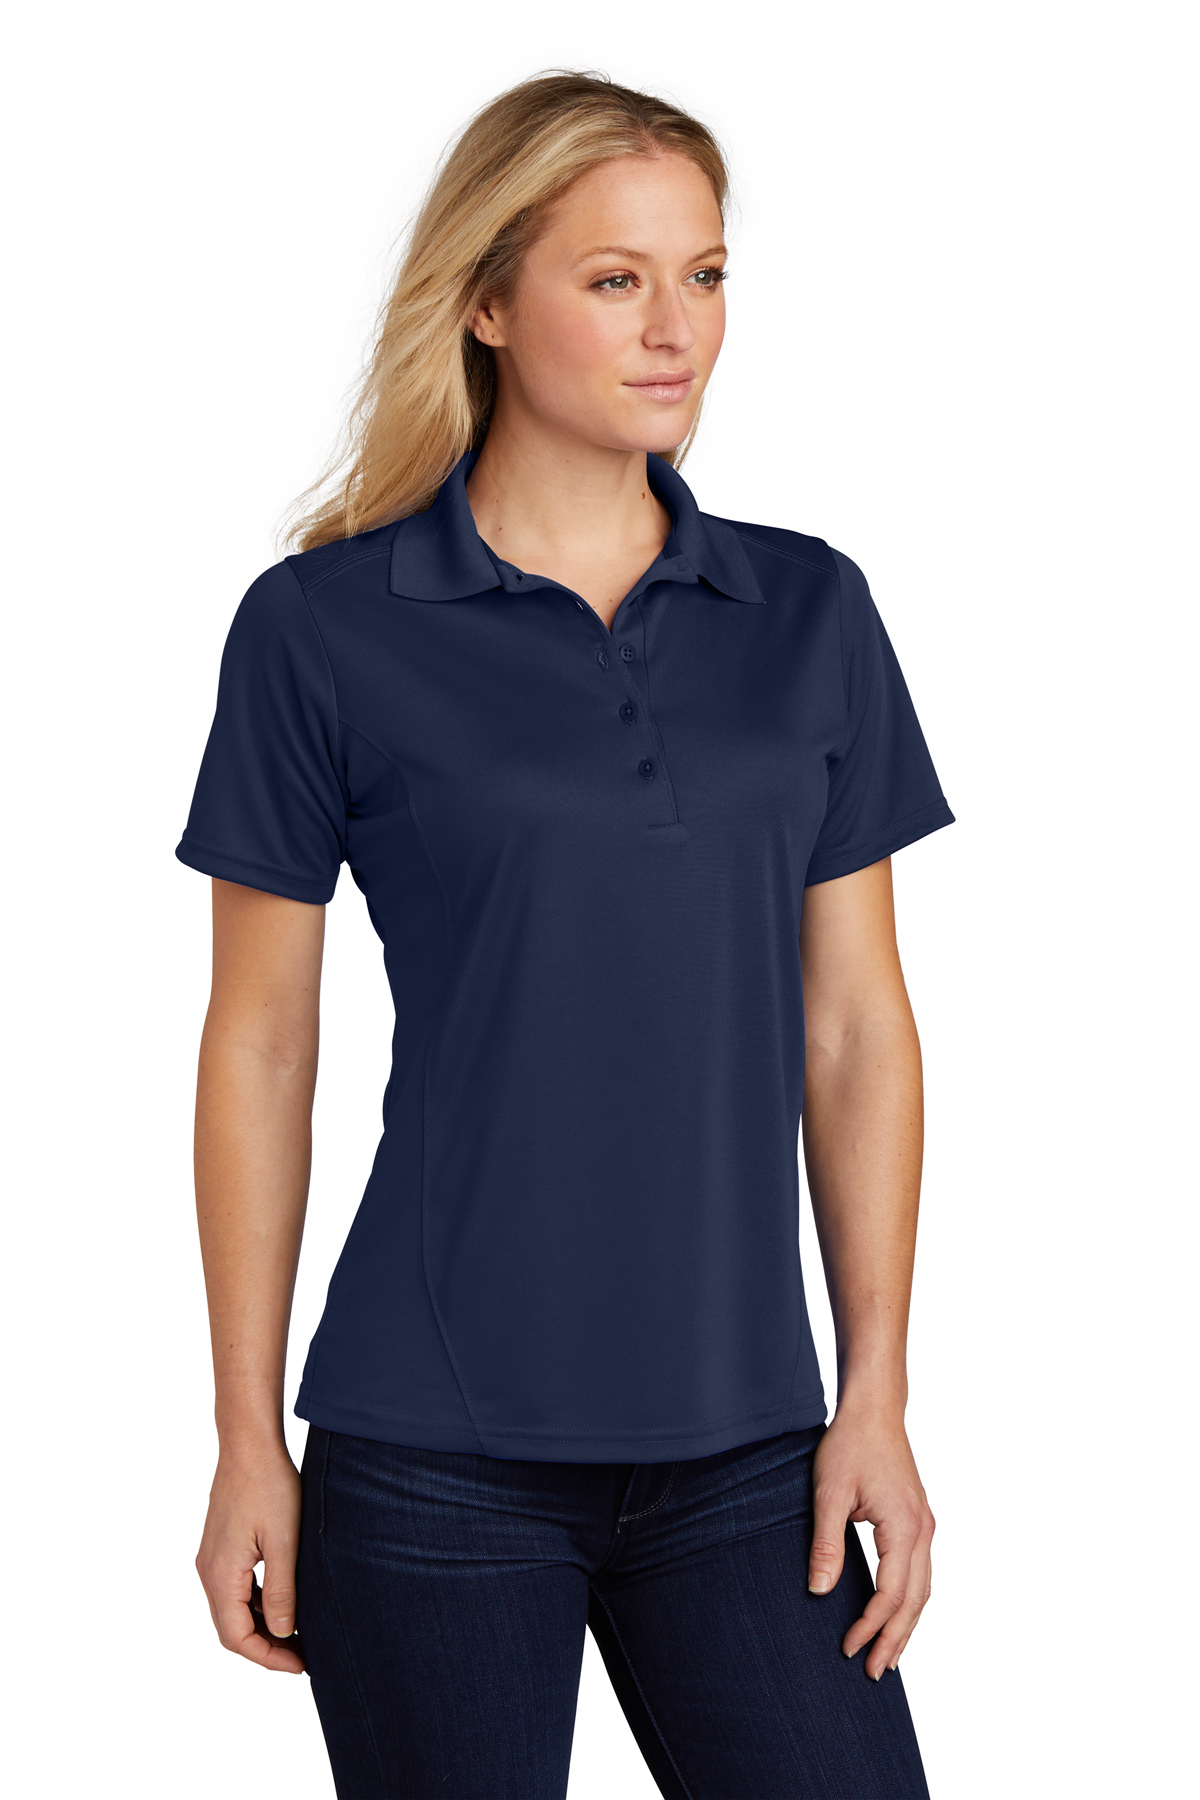 Sport-Tek Ladies Dry Zone Raglan Accent Polo | Product | Company Casuals